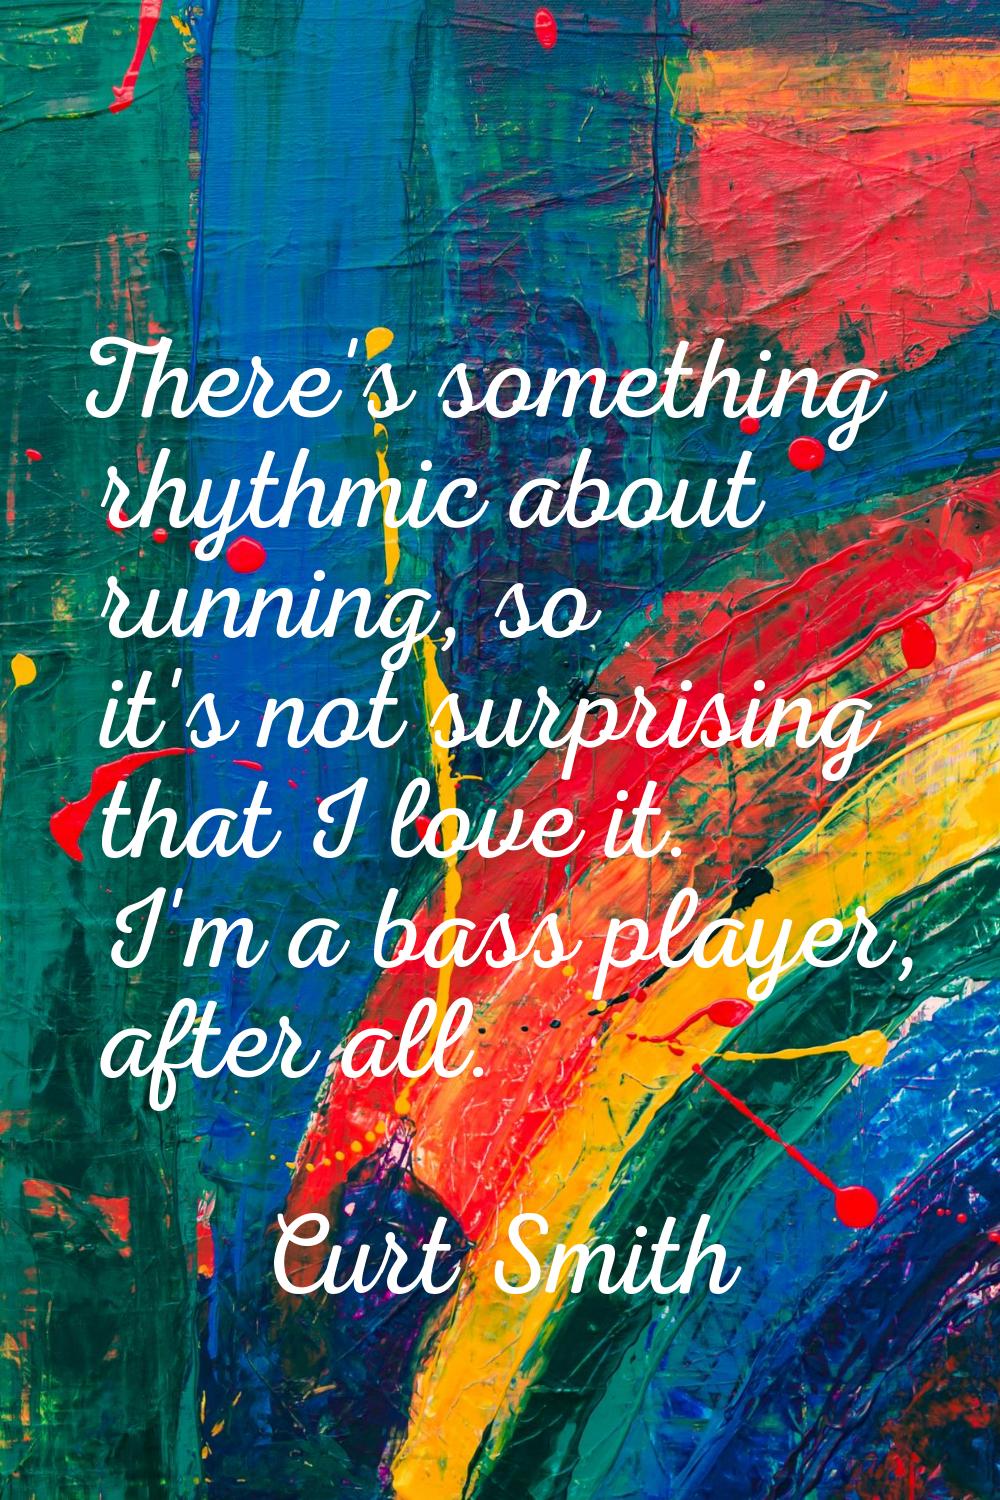 There's something rhythmic about running, so it's not surprising that I love it. I'm a bass player,